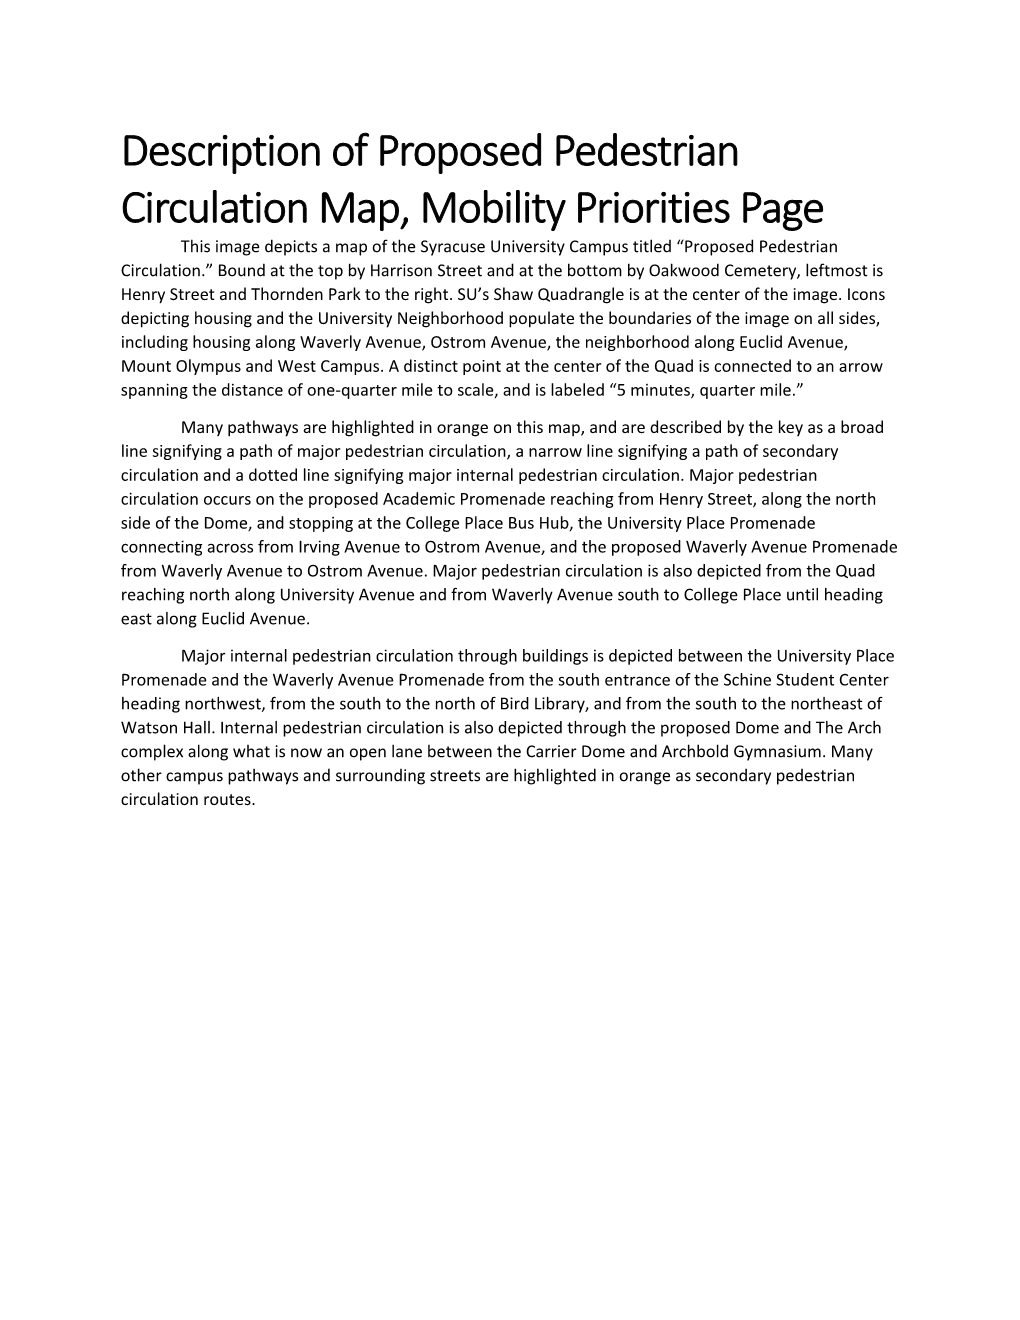 Description of Proposed Pedestrian Circulation Map, Mobility Priorities Page